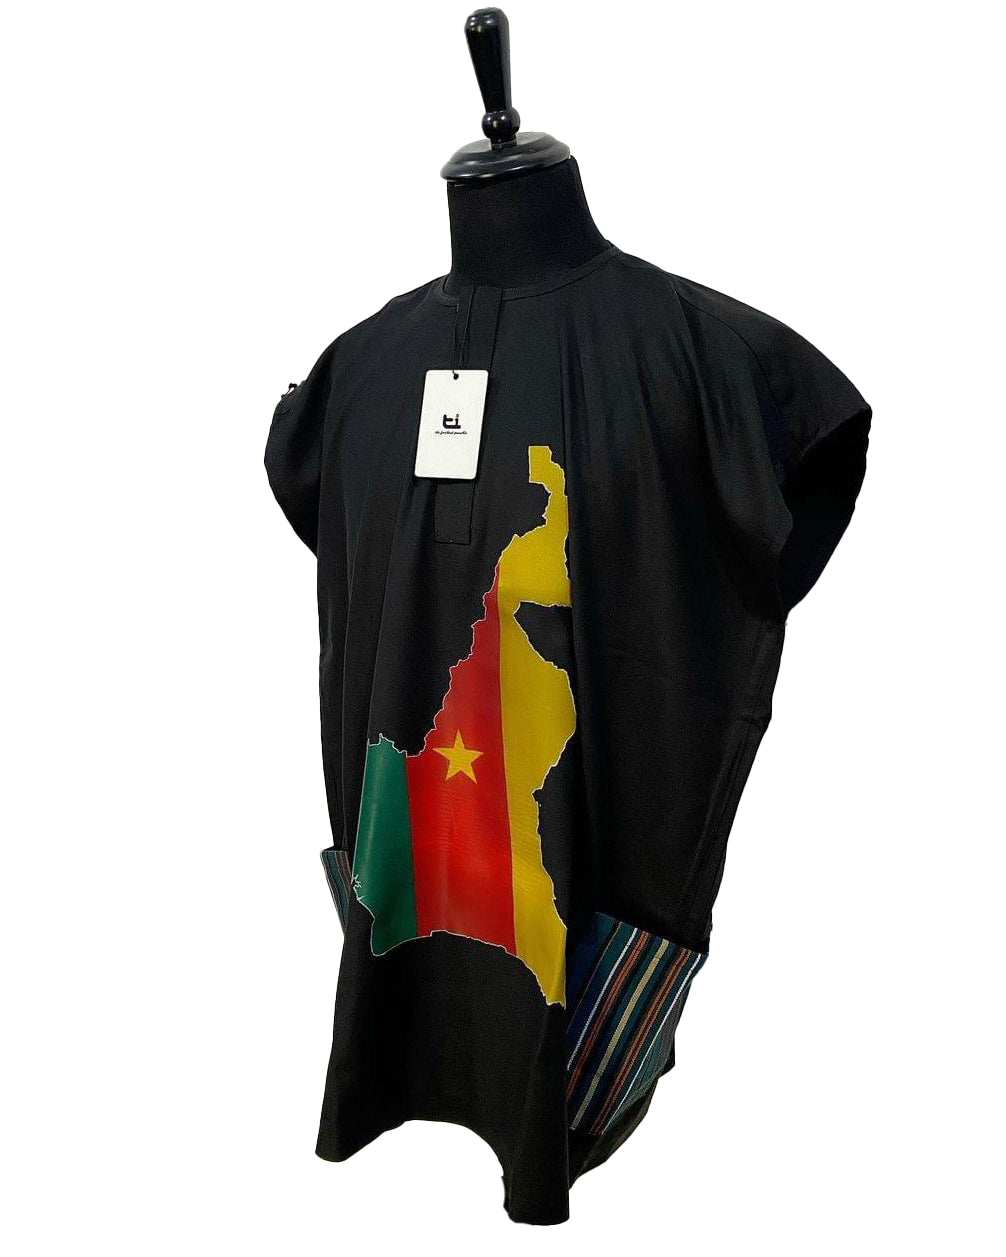 African Art Wear Kenya flag Print summer top Outfit Casual Short Sleeve Black loose fashion Long T-shirt With Pockets